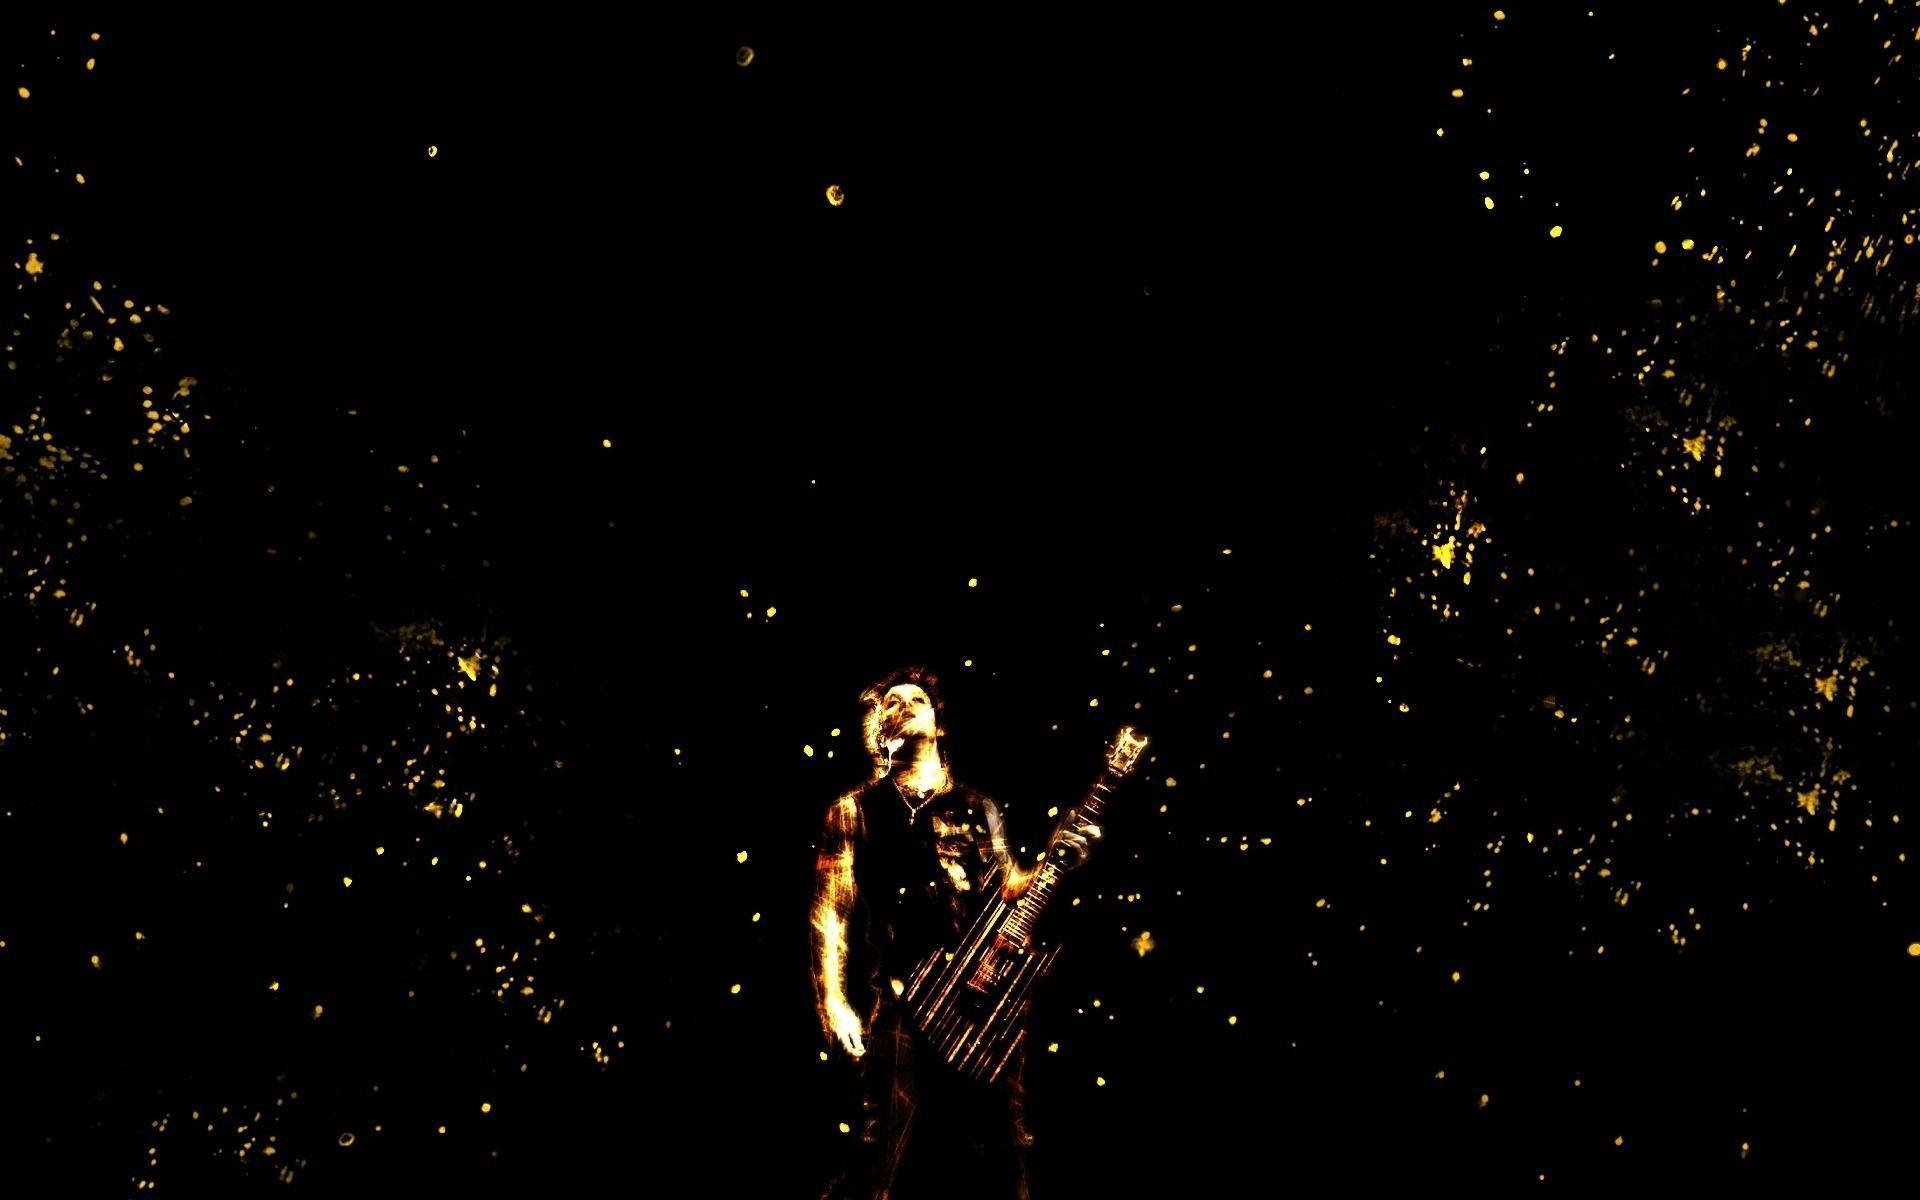 Wallpaper of Avenged Sevenfold 100% Quality HD for mobile and desktop